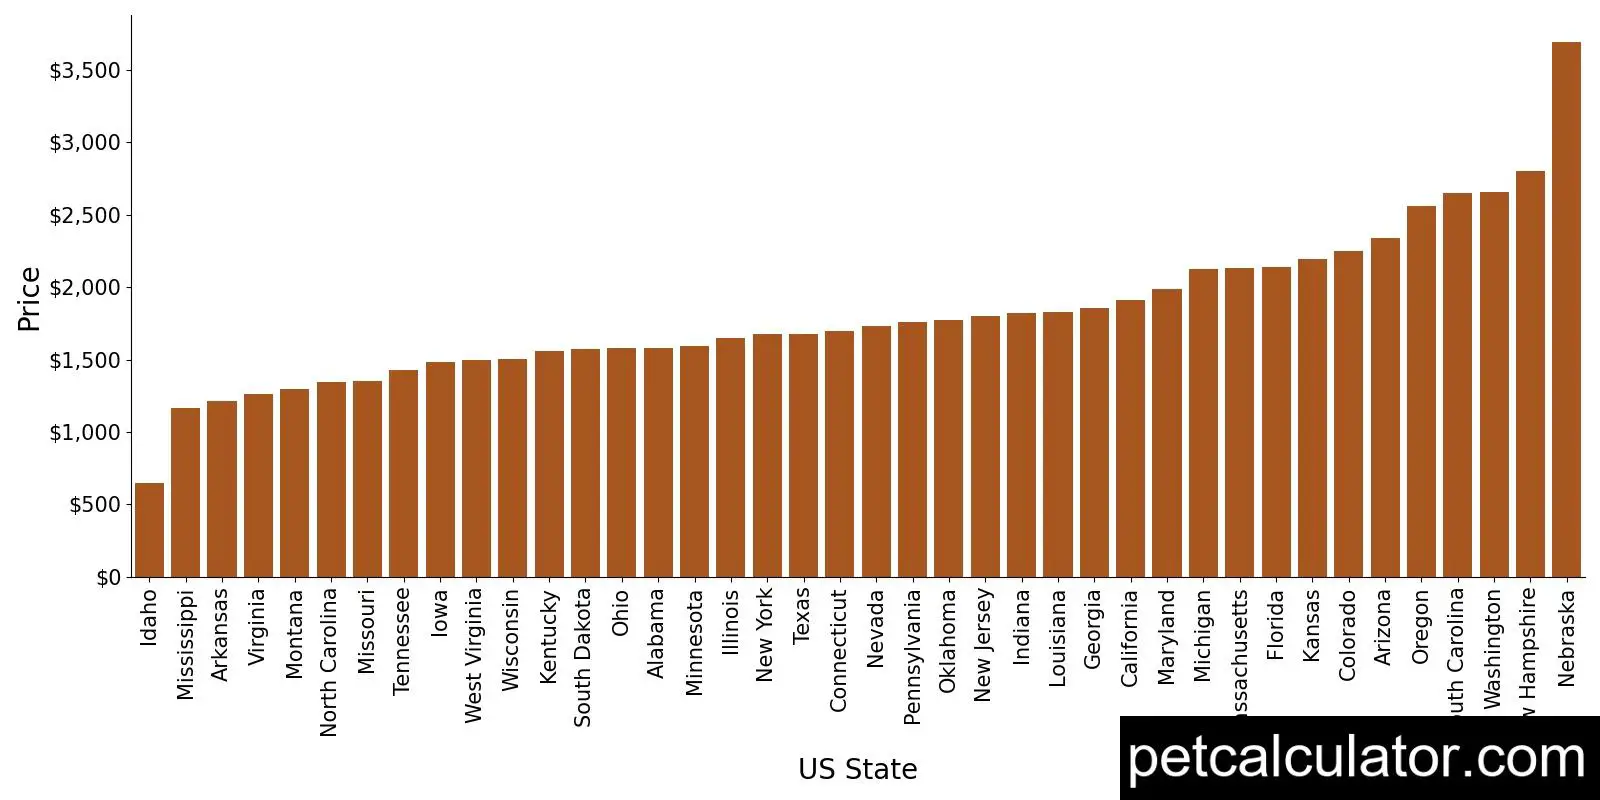 Price of Shih Tzu by US State 